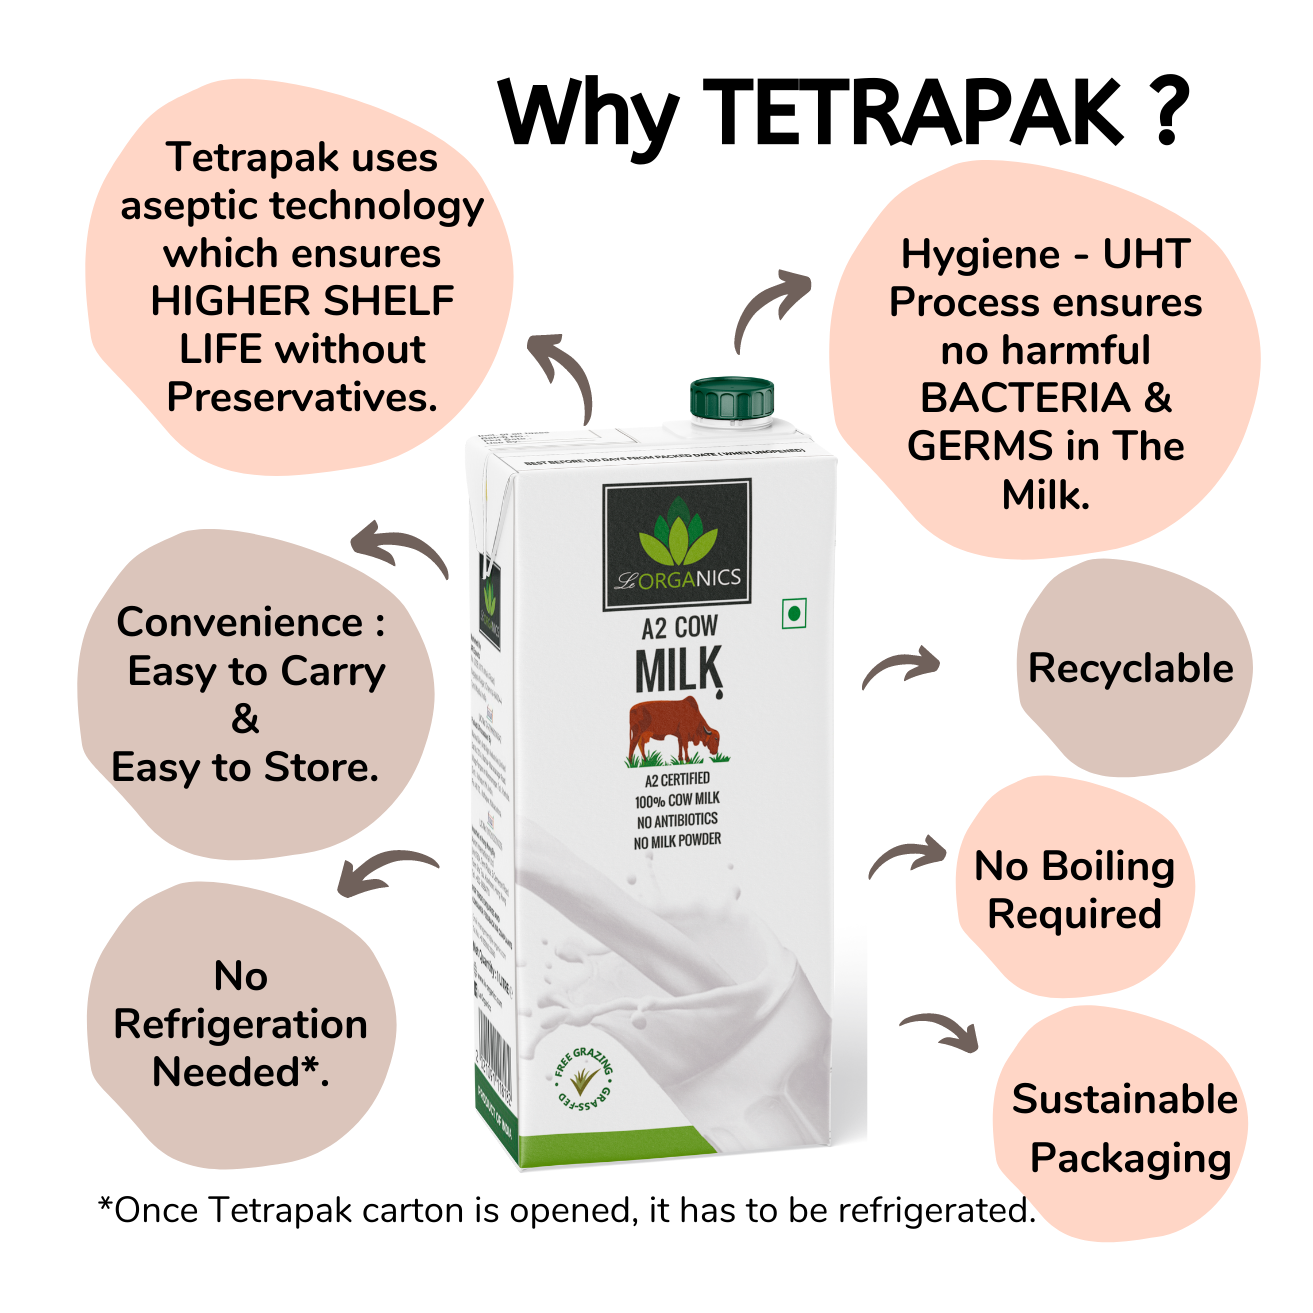 Le-Organics A2 Cow milk in Tetrapak | Pure Gir Cow Milk | UHT Treated | NO Antibiotics | Certified A2 | Pack of 4 - 1 ltr each